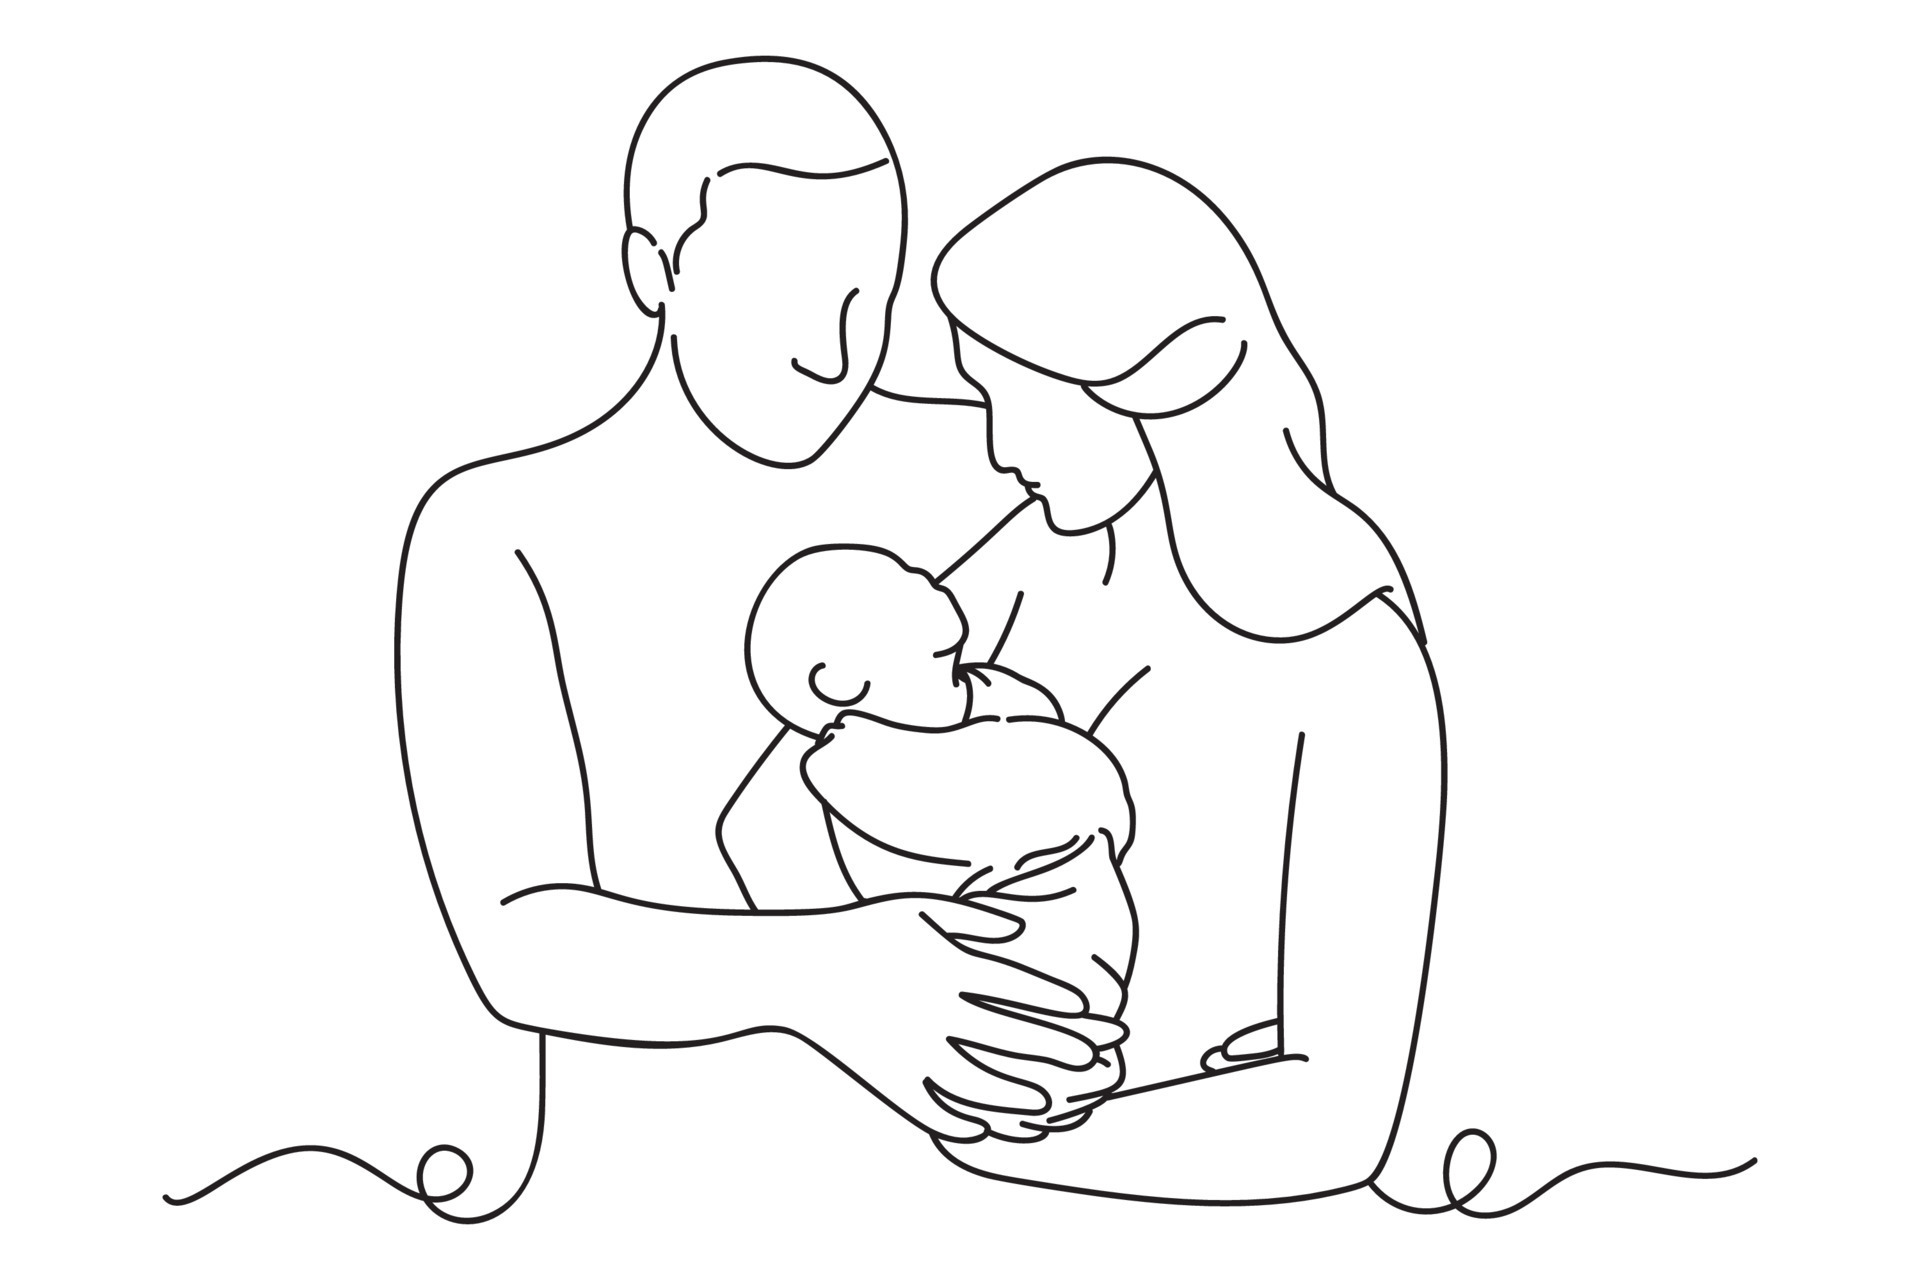 Father mother and baby vector illustration sketch hand drawn with black  lines isolated on white background family concept  CanStock